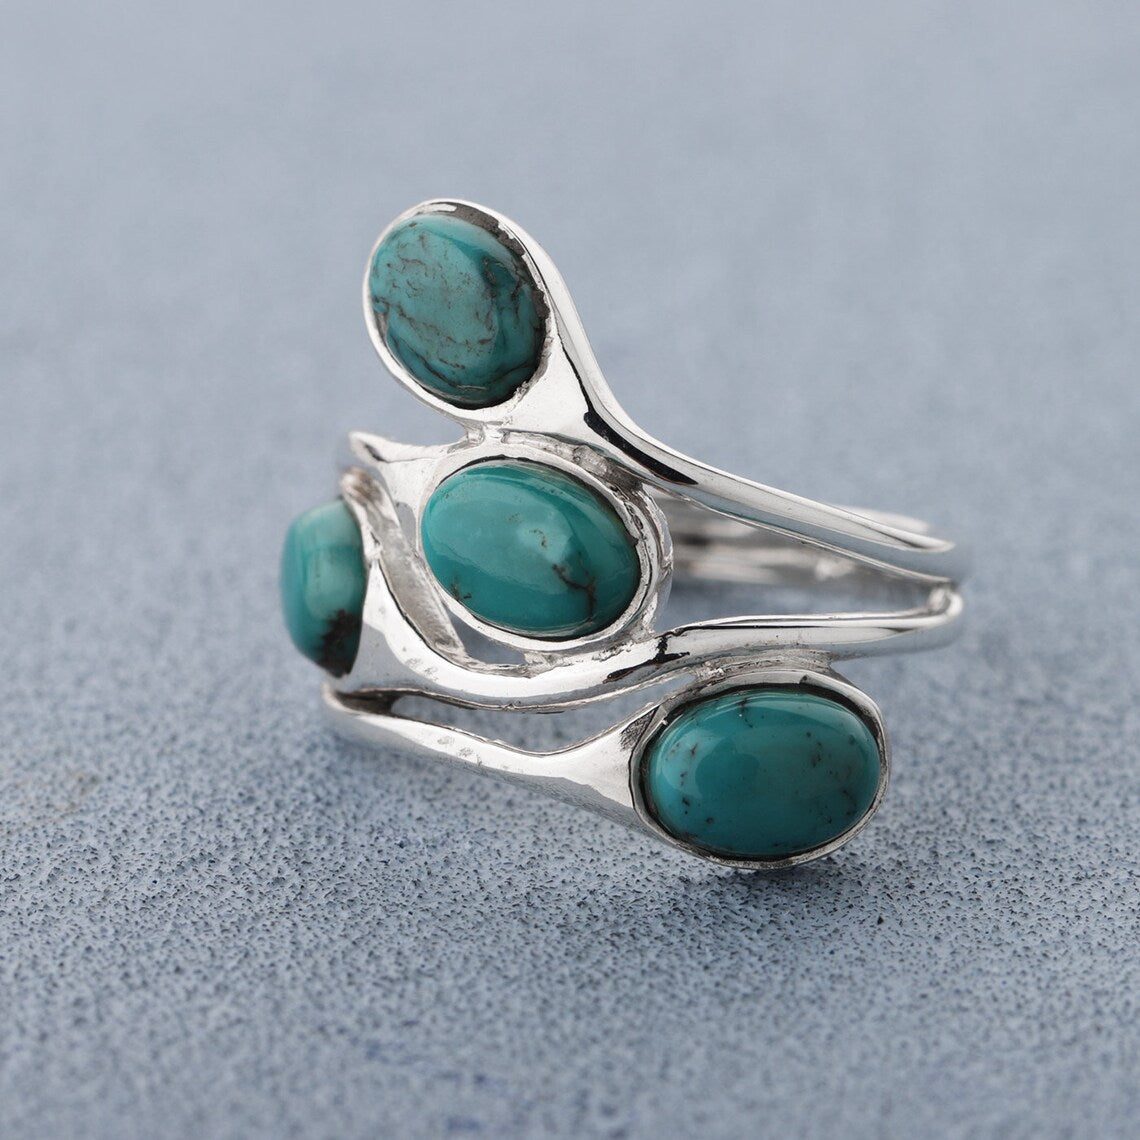 Turquoise Silver Ring, Multi Turquoise ring, sterling silver handmade ring, ring size 6-10 us